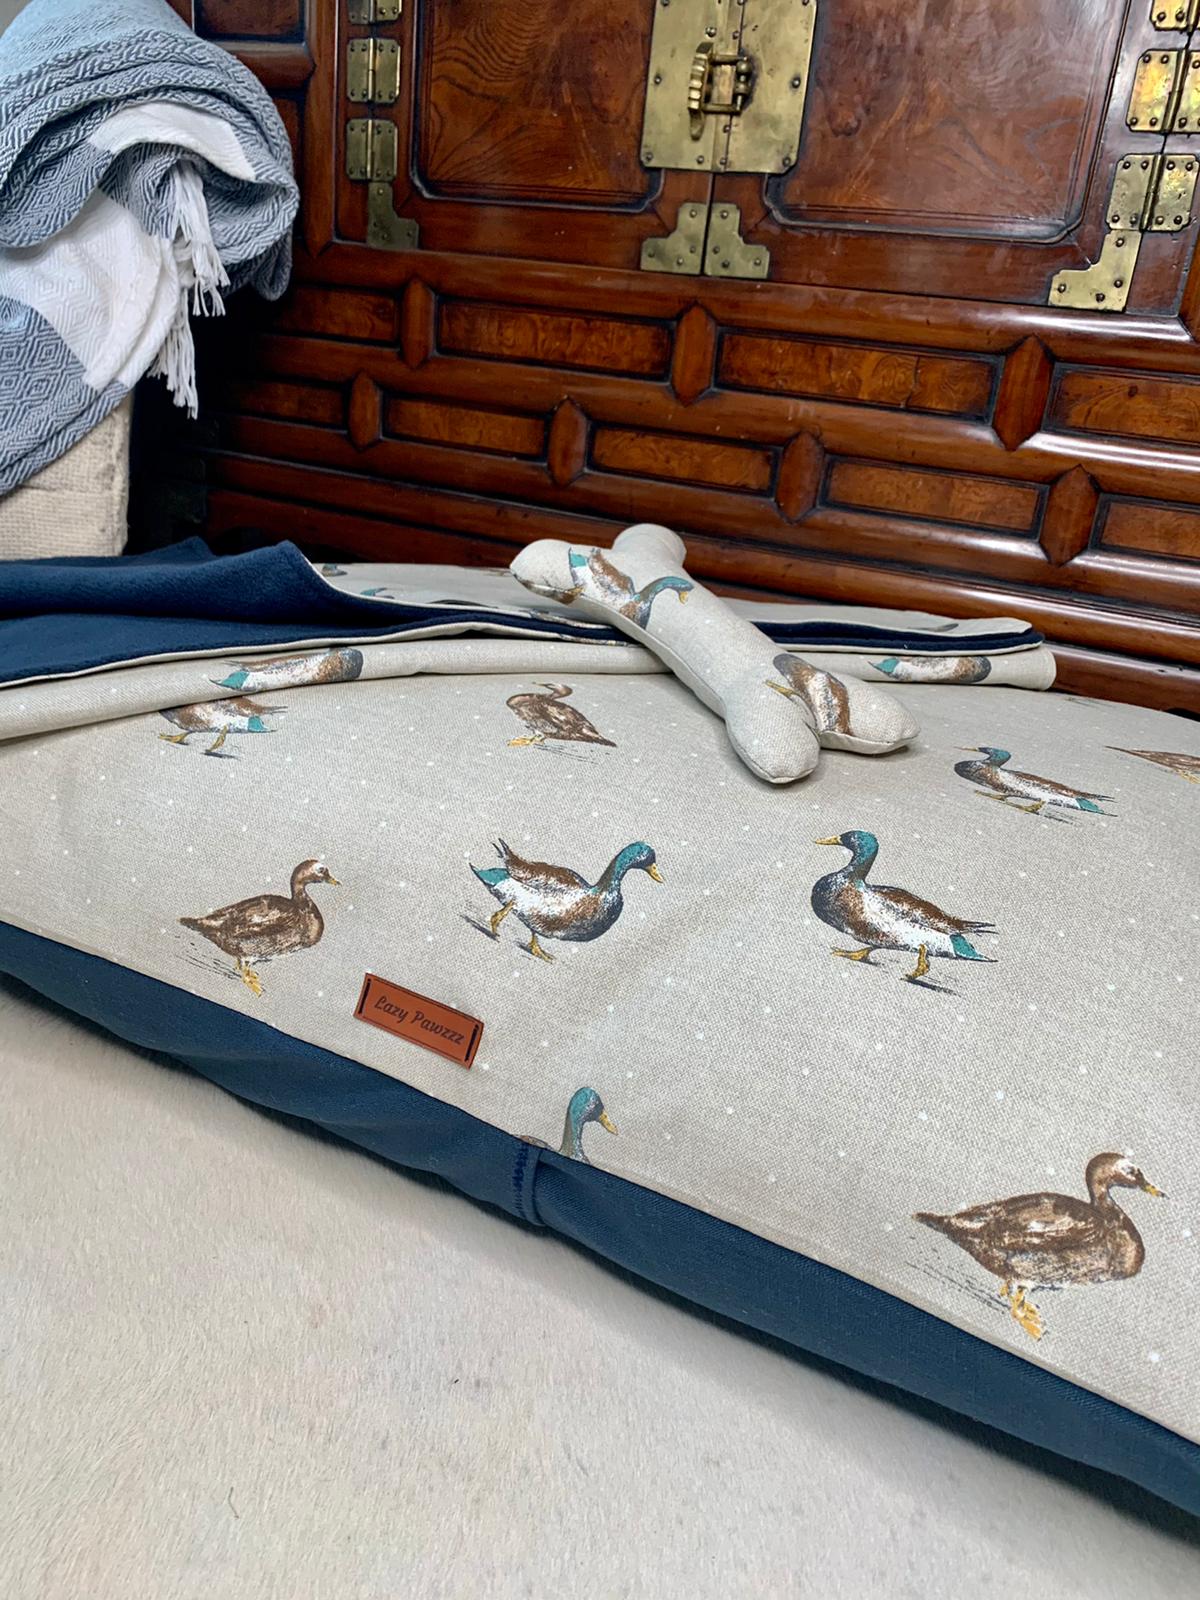 Country Ducks Dog Bed